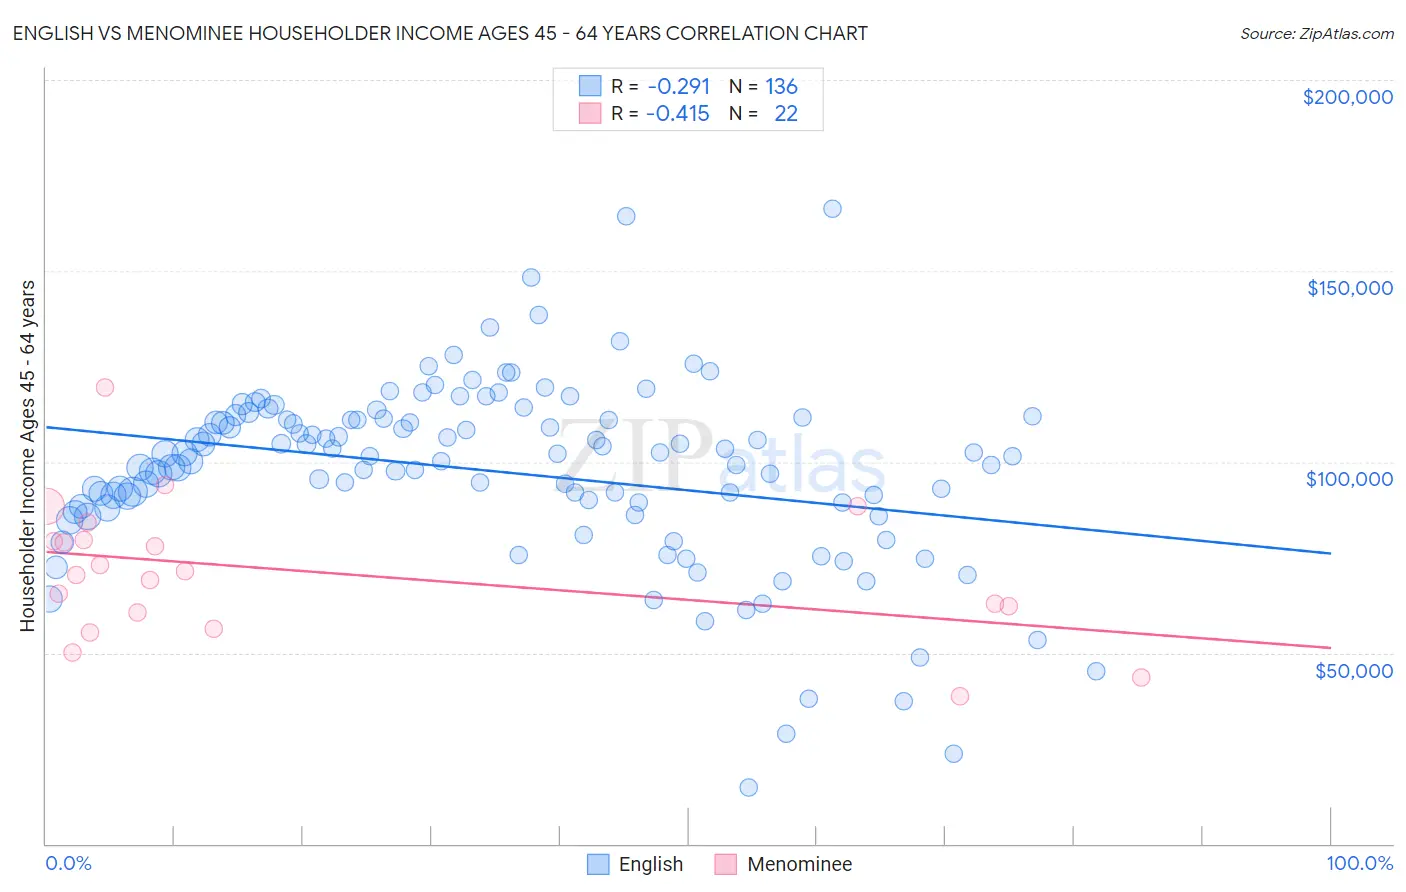 English vs Menominee Householder Income Ages 45 - 64 years